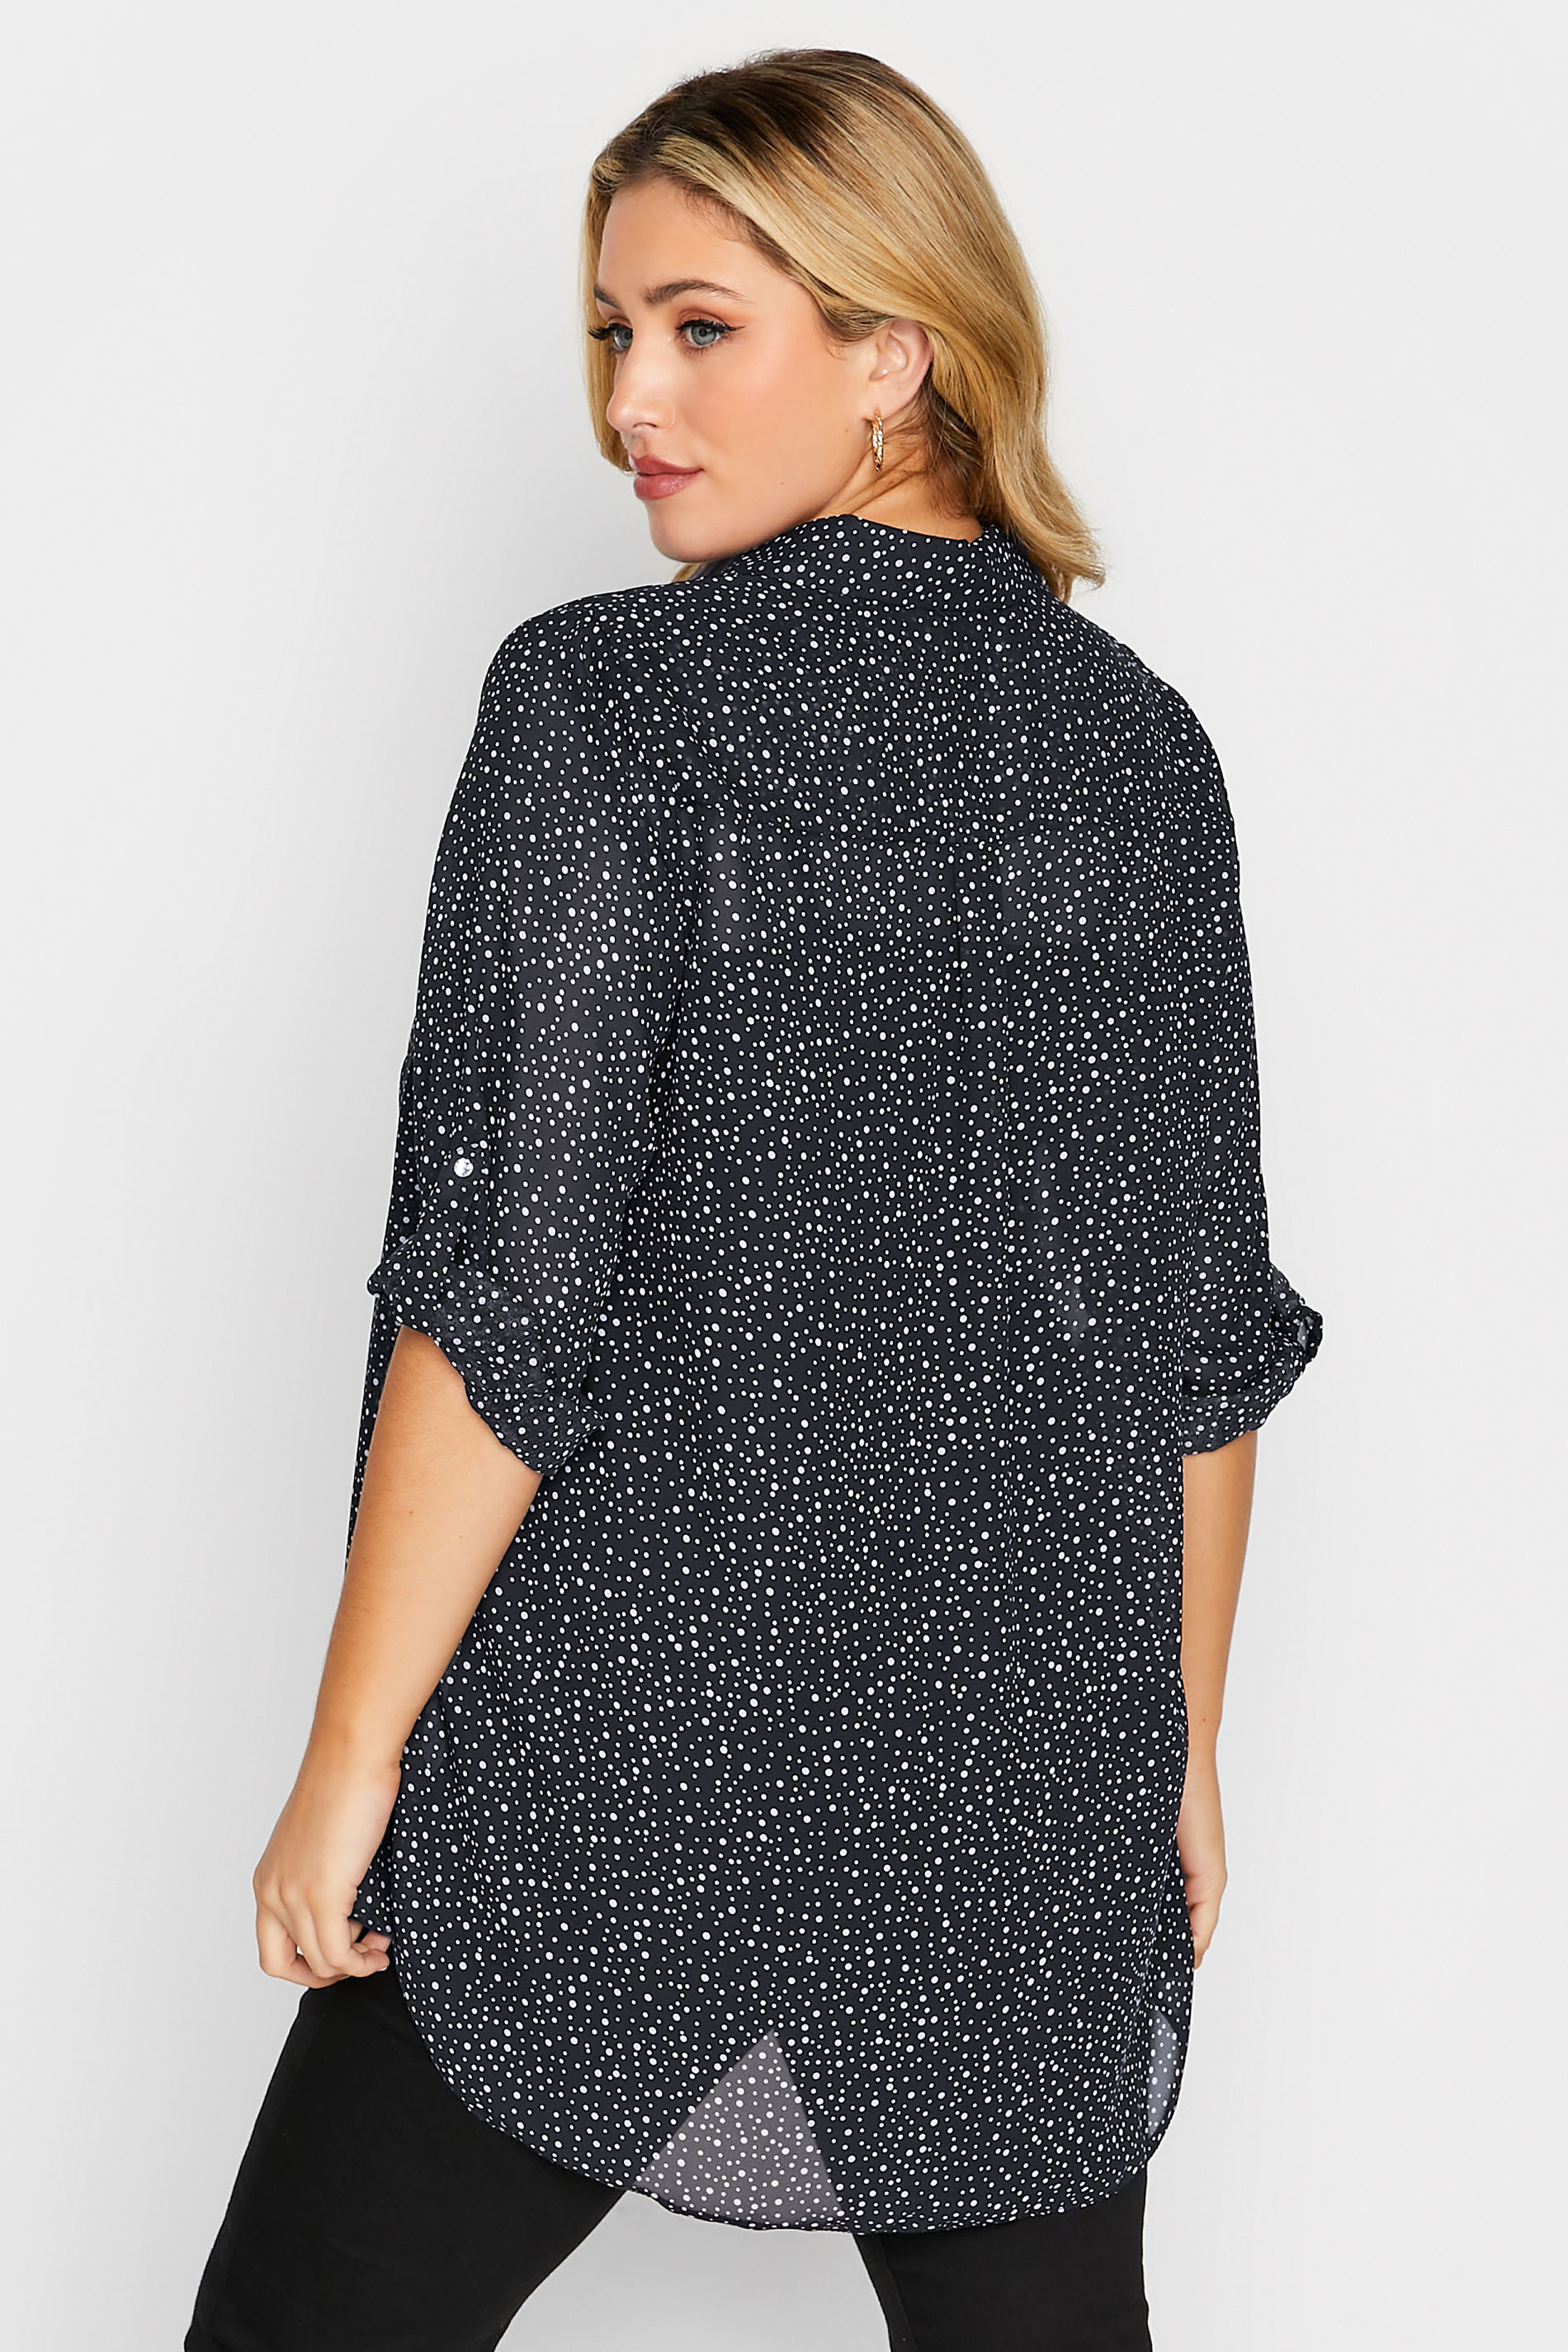 YOURS Plus Size Navy Blue Polka Dot Button Through Shirt | Yours Clothing 3